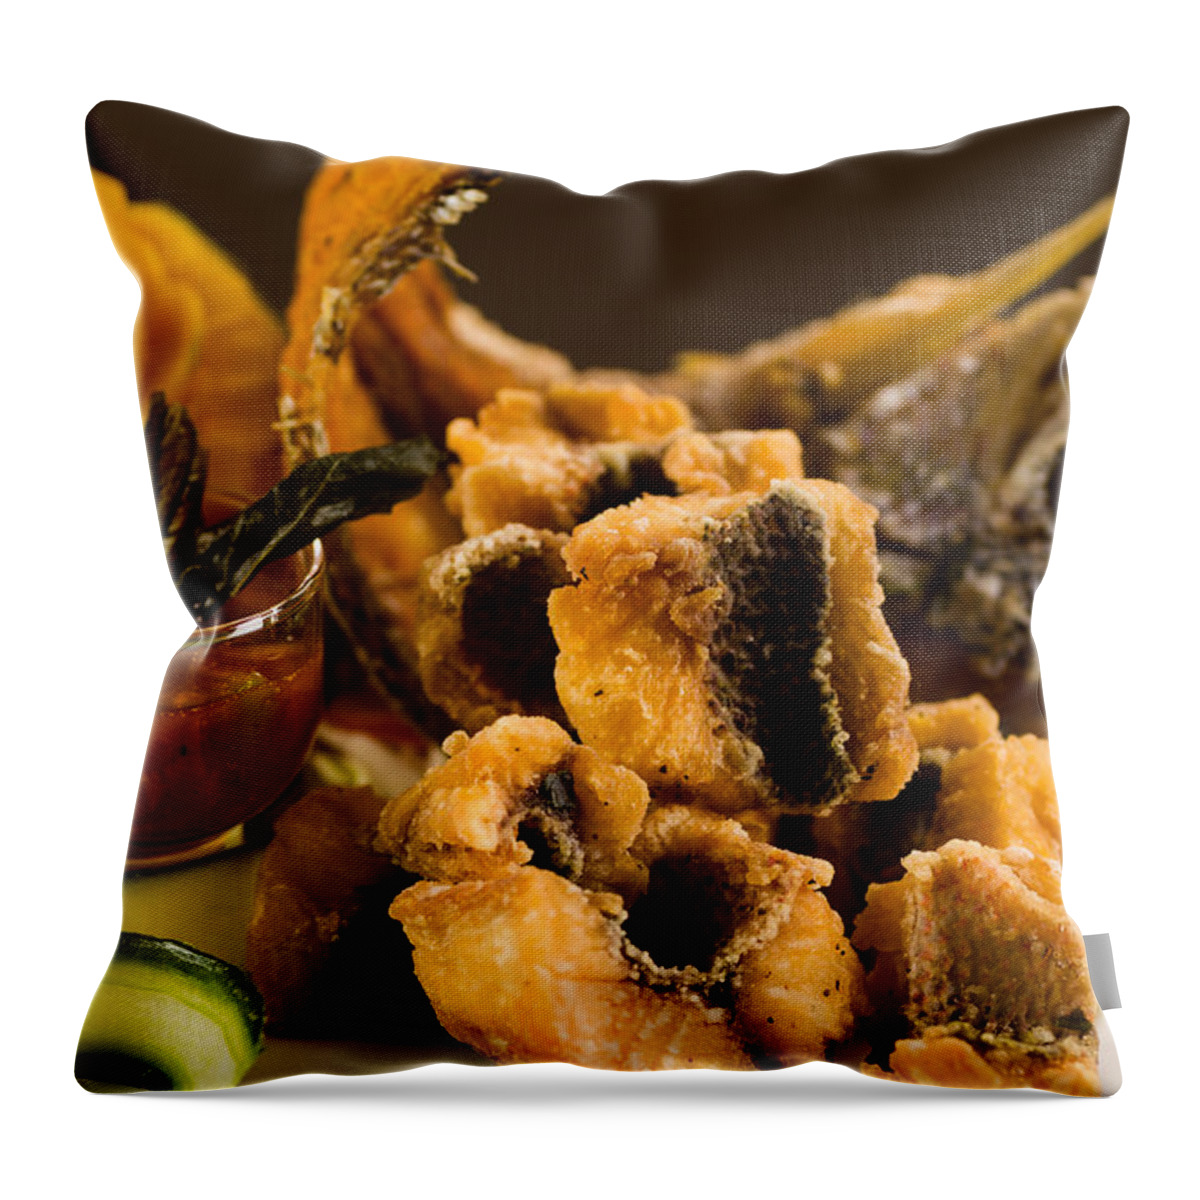 Asian Throw Pillow featuring the photograph Asian Fried Snapper by Raul Rodriguez